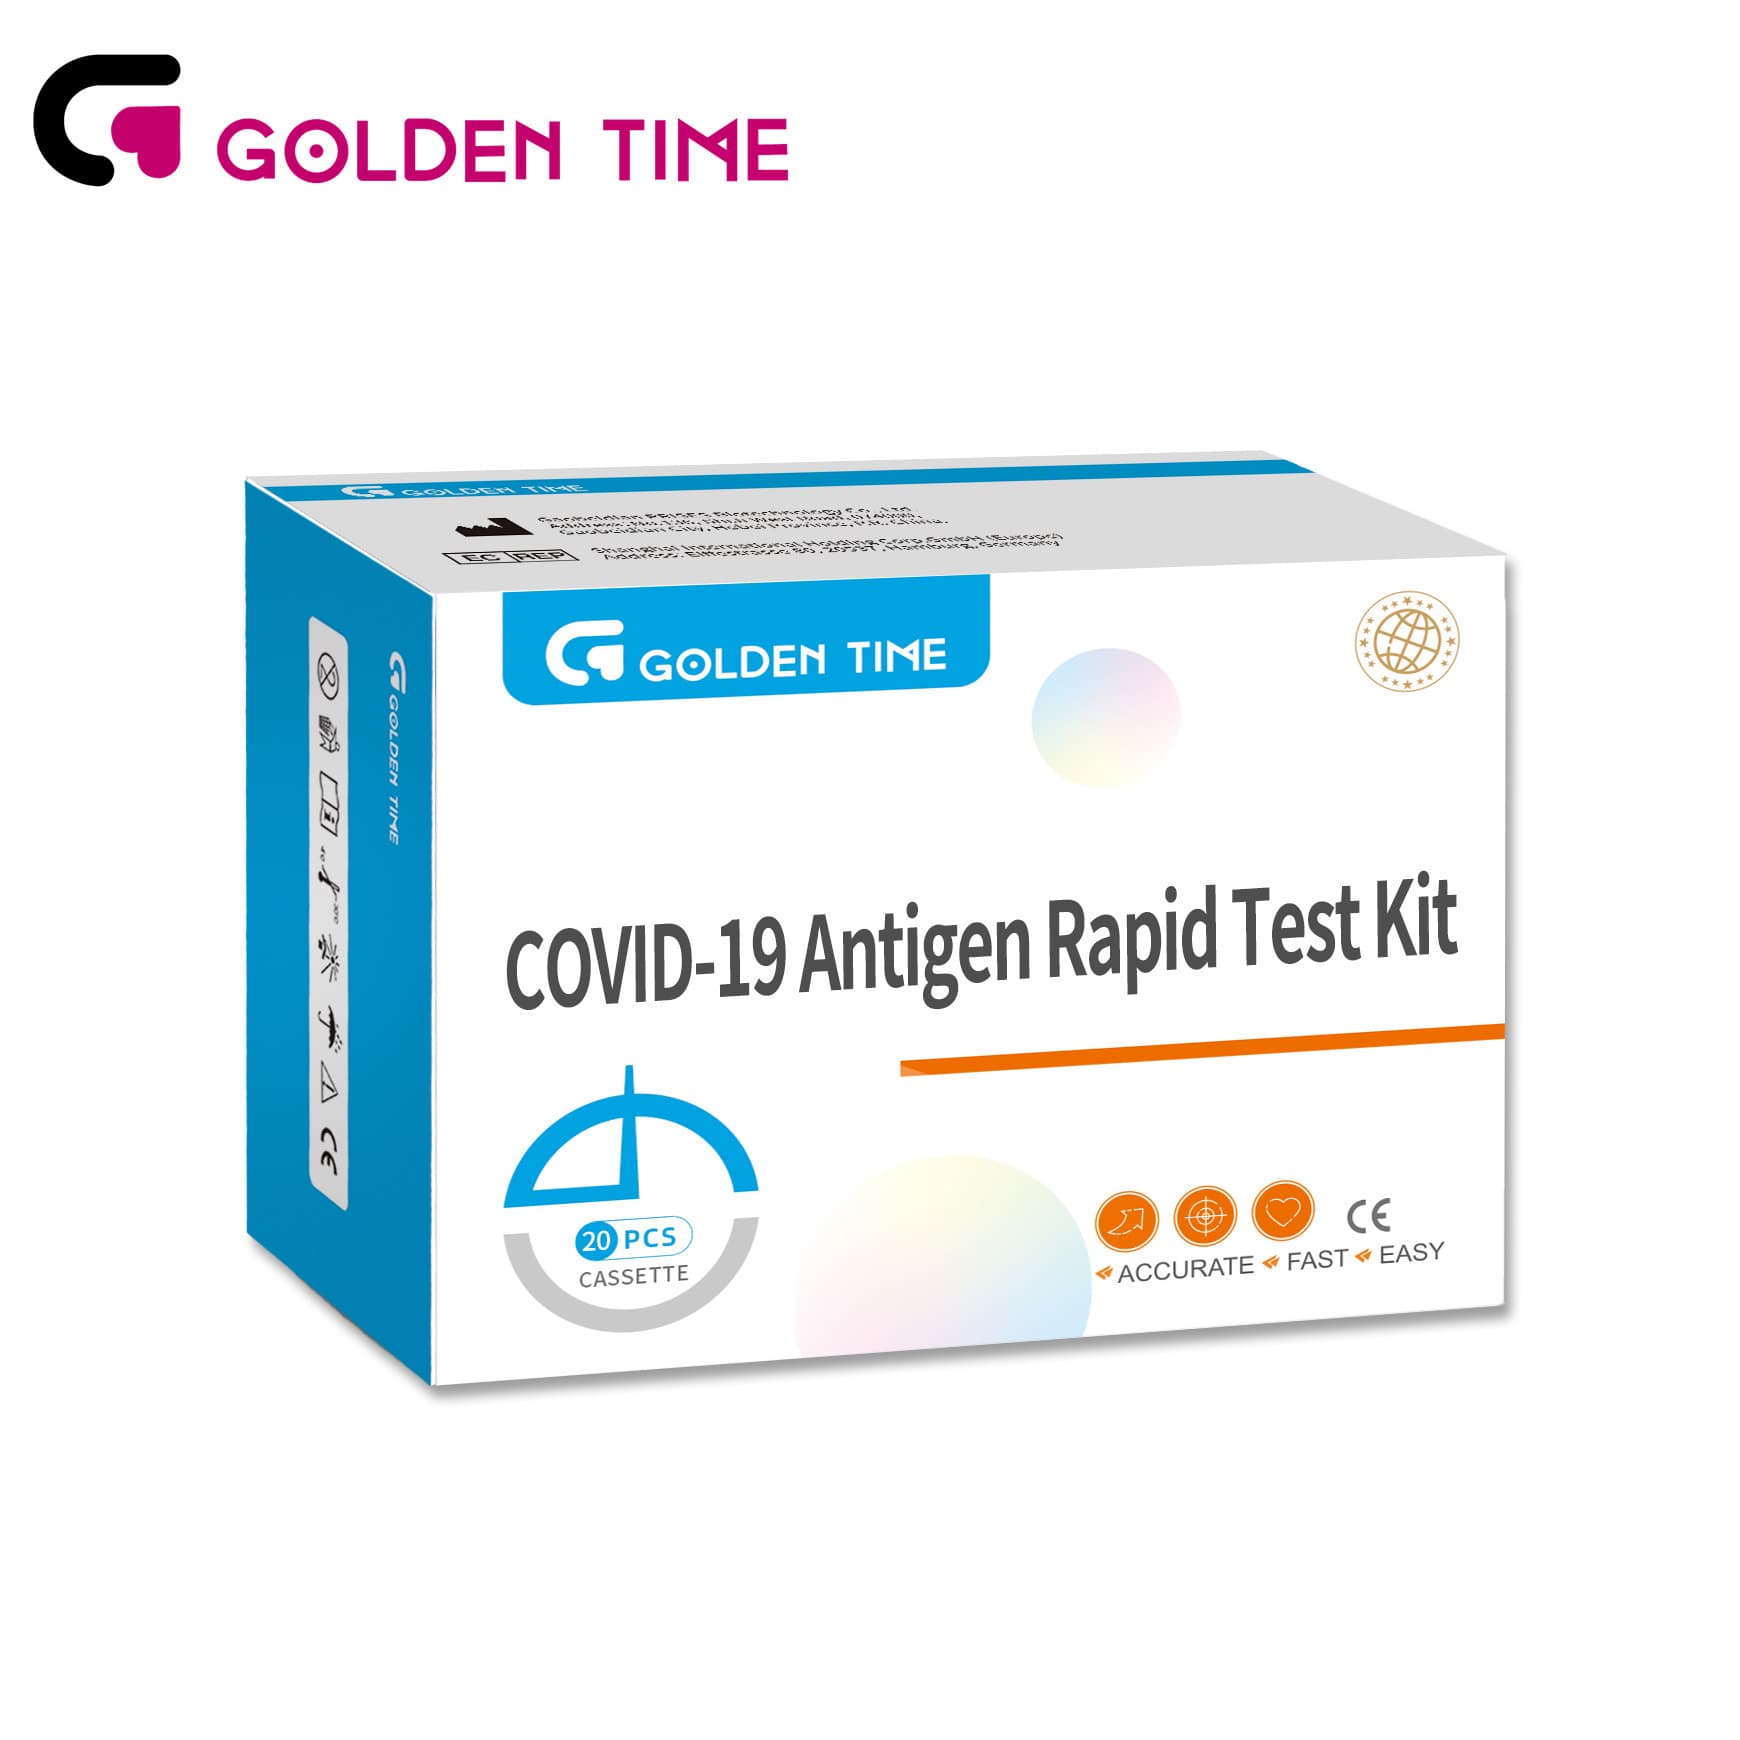 COVID-19 (SARS-CoV-2) Antigen Rapid Test Kit is a test and provides a preliminary test result to aid in the diagnosis of infection with novel Coronavirus.